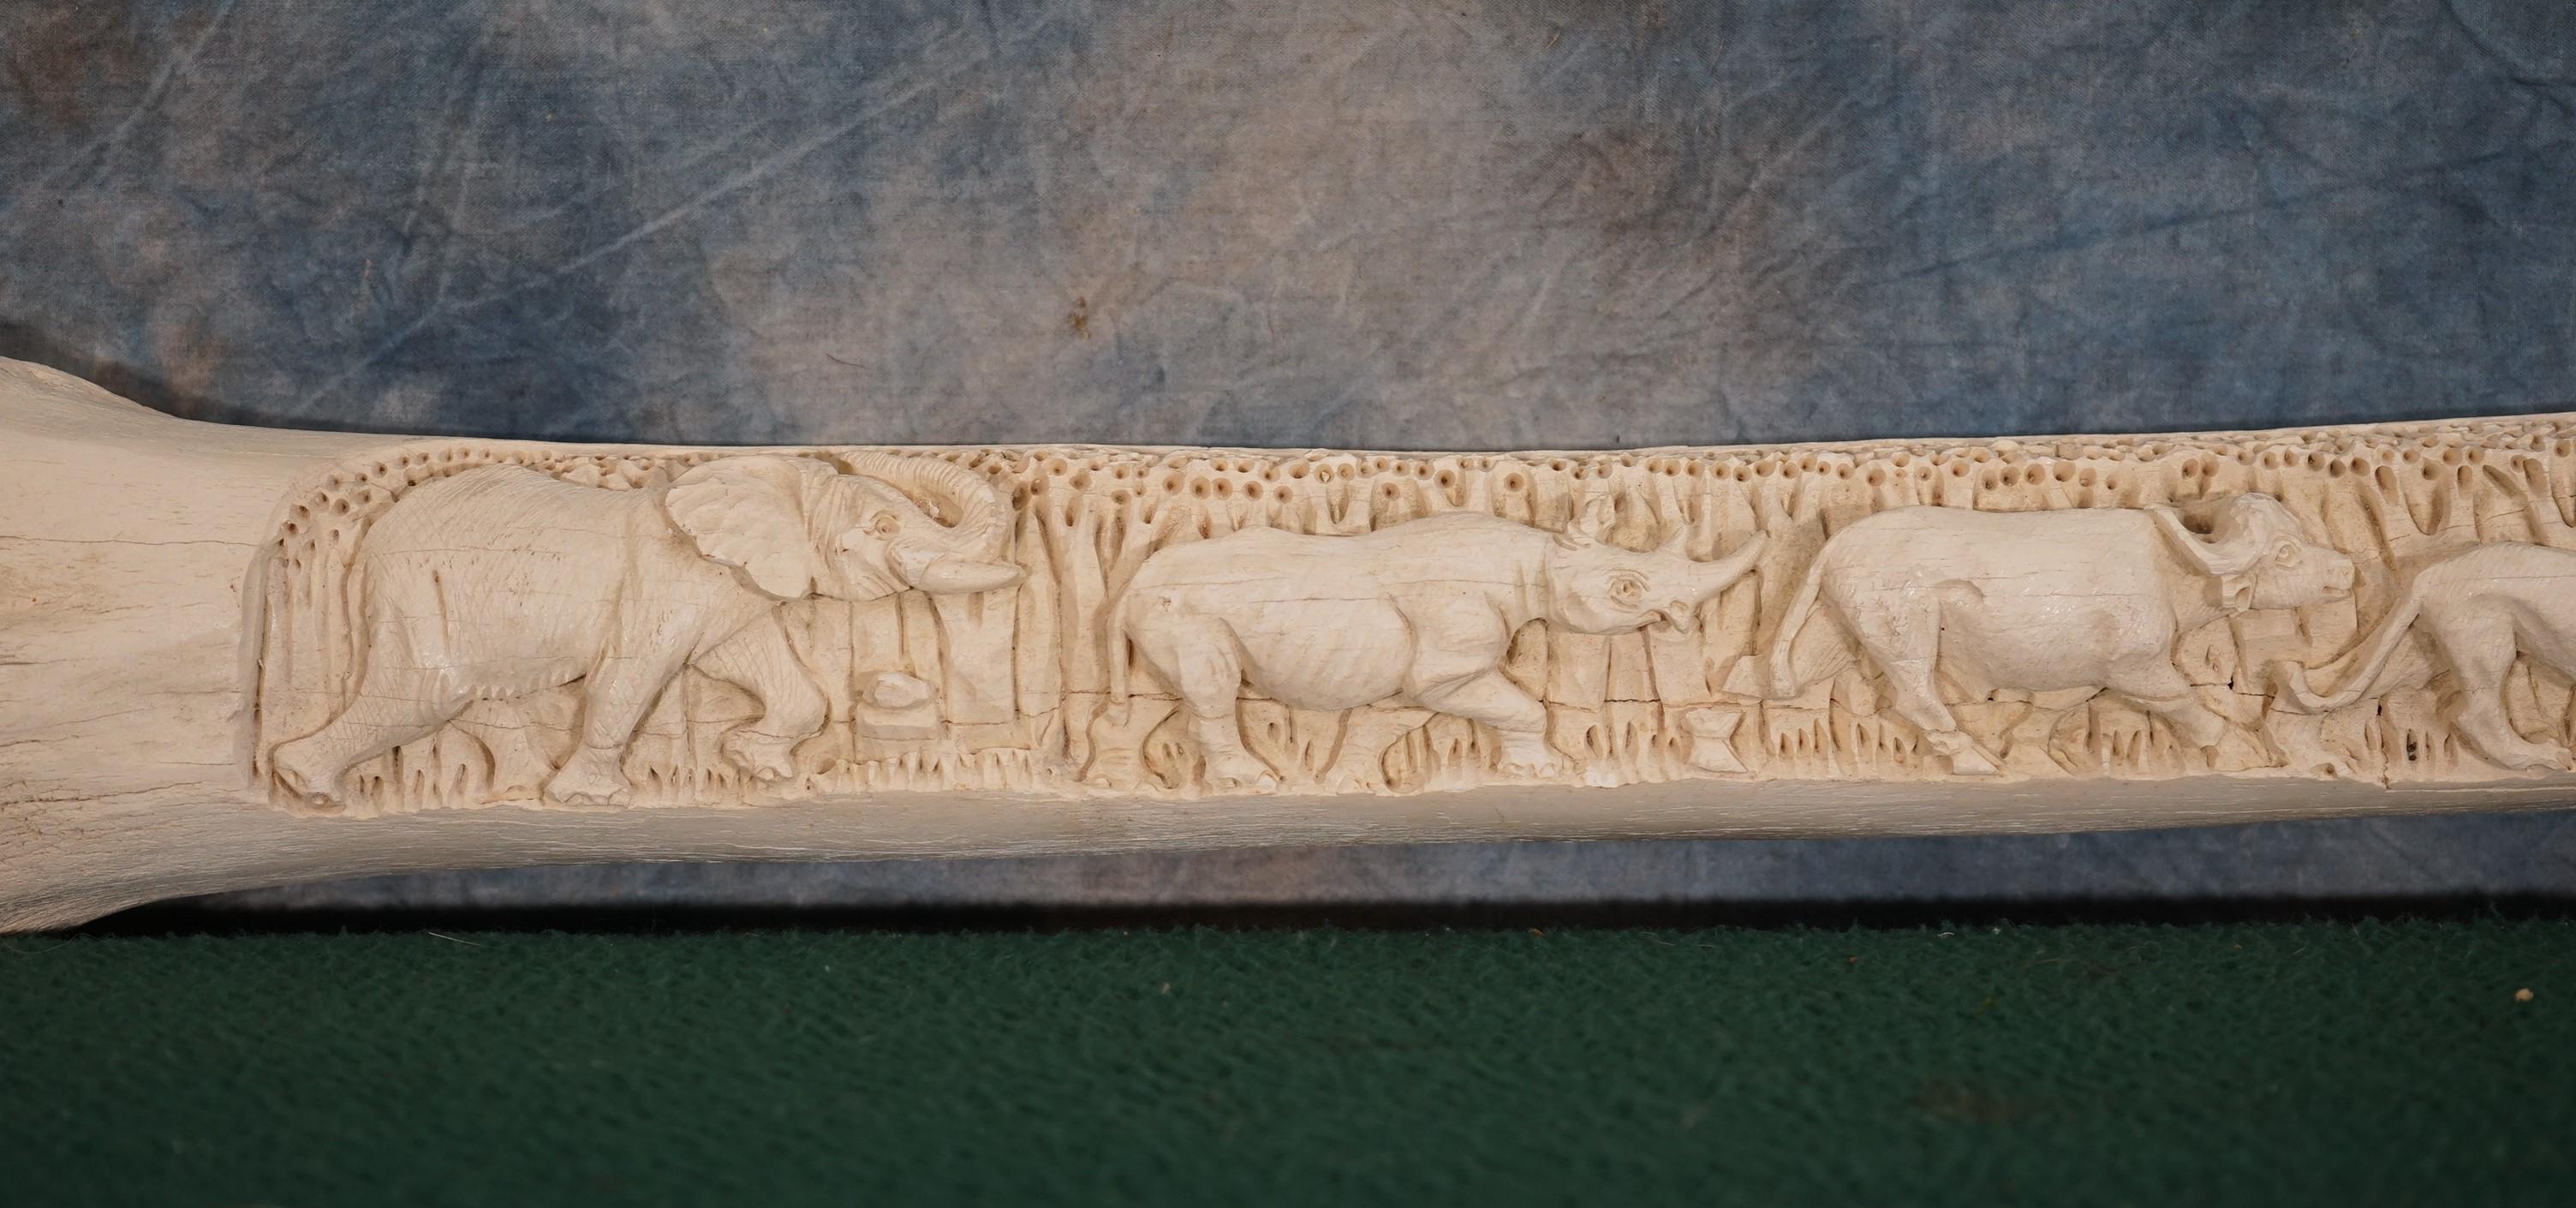 Giraffe Bone with African Big Five Game Animals Carved into it